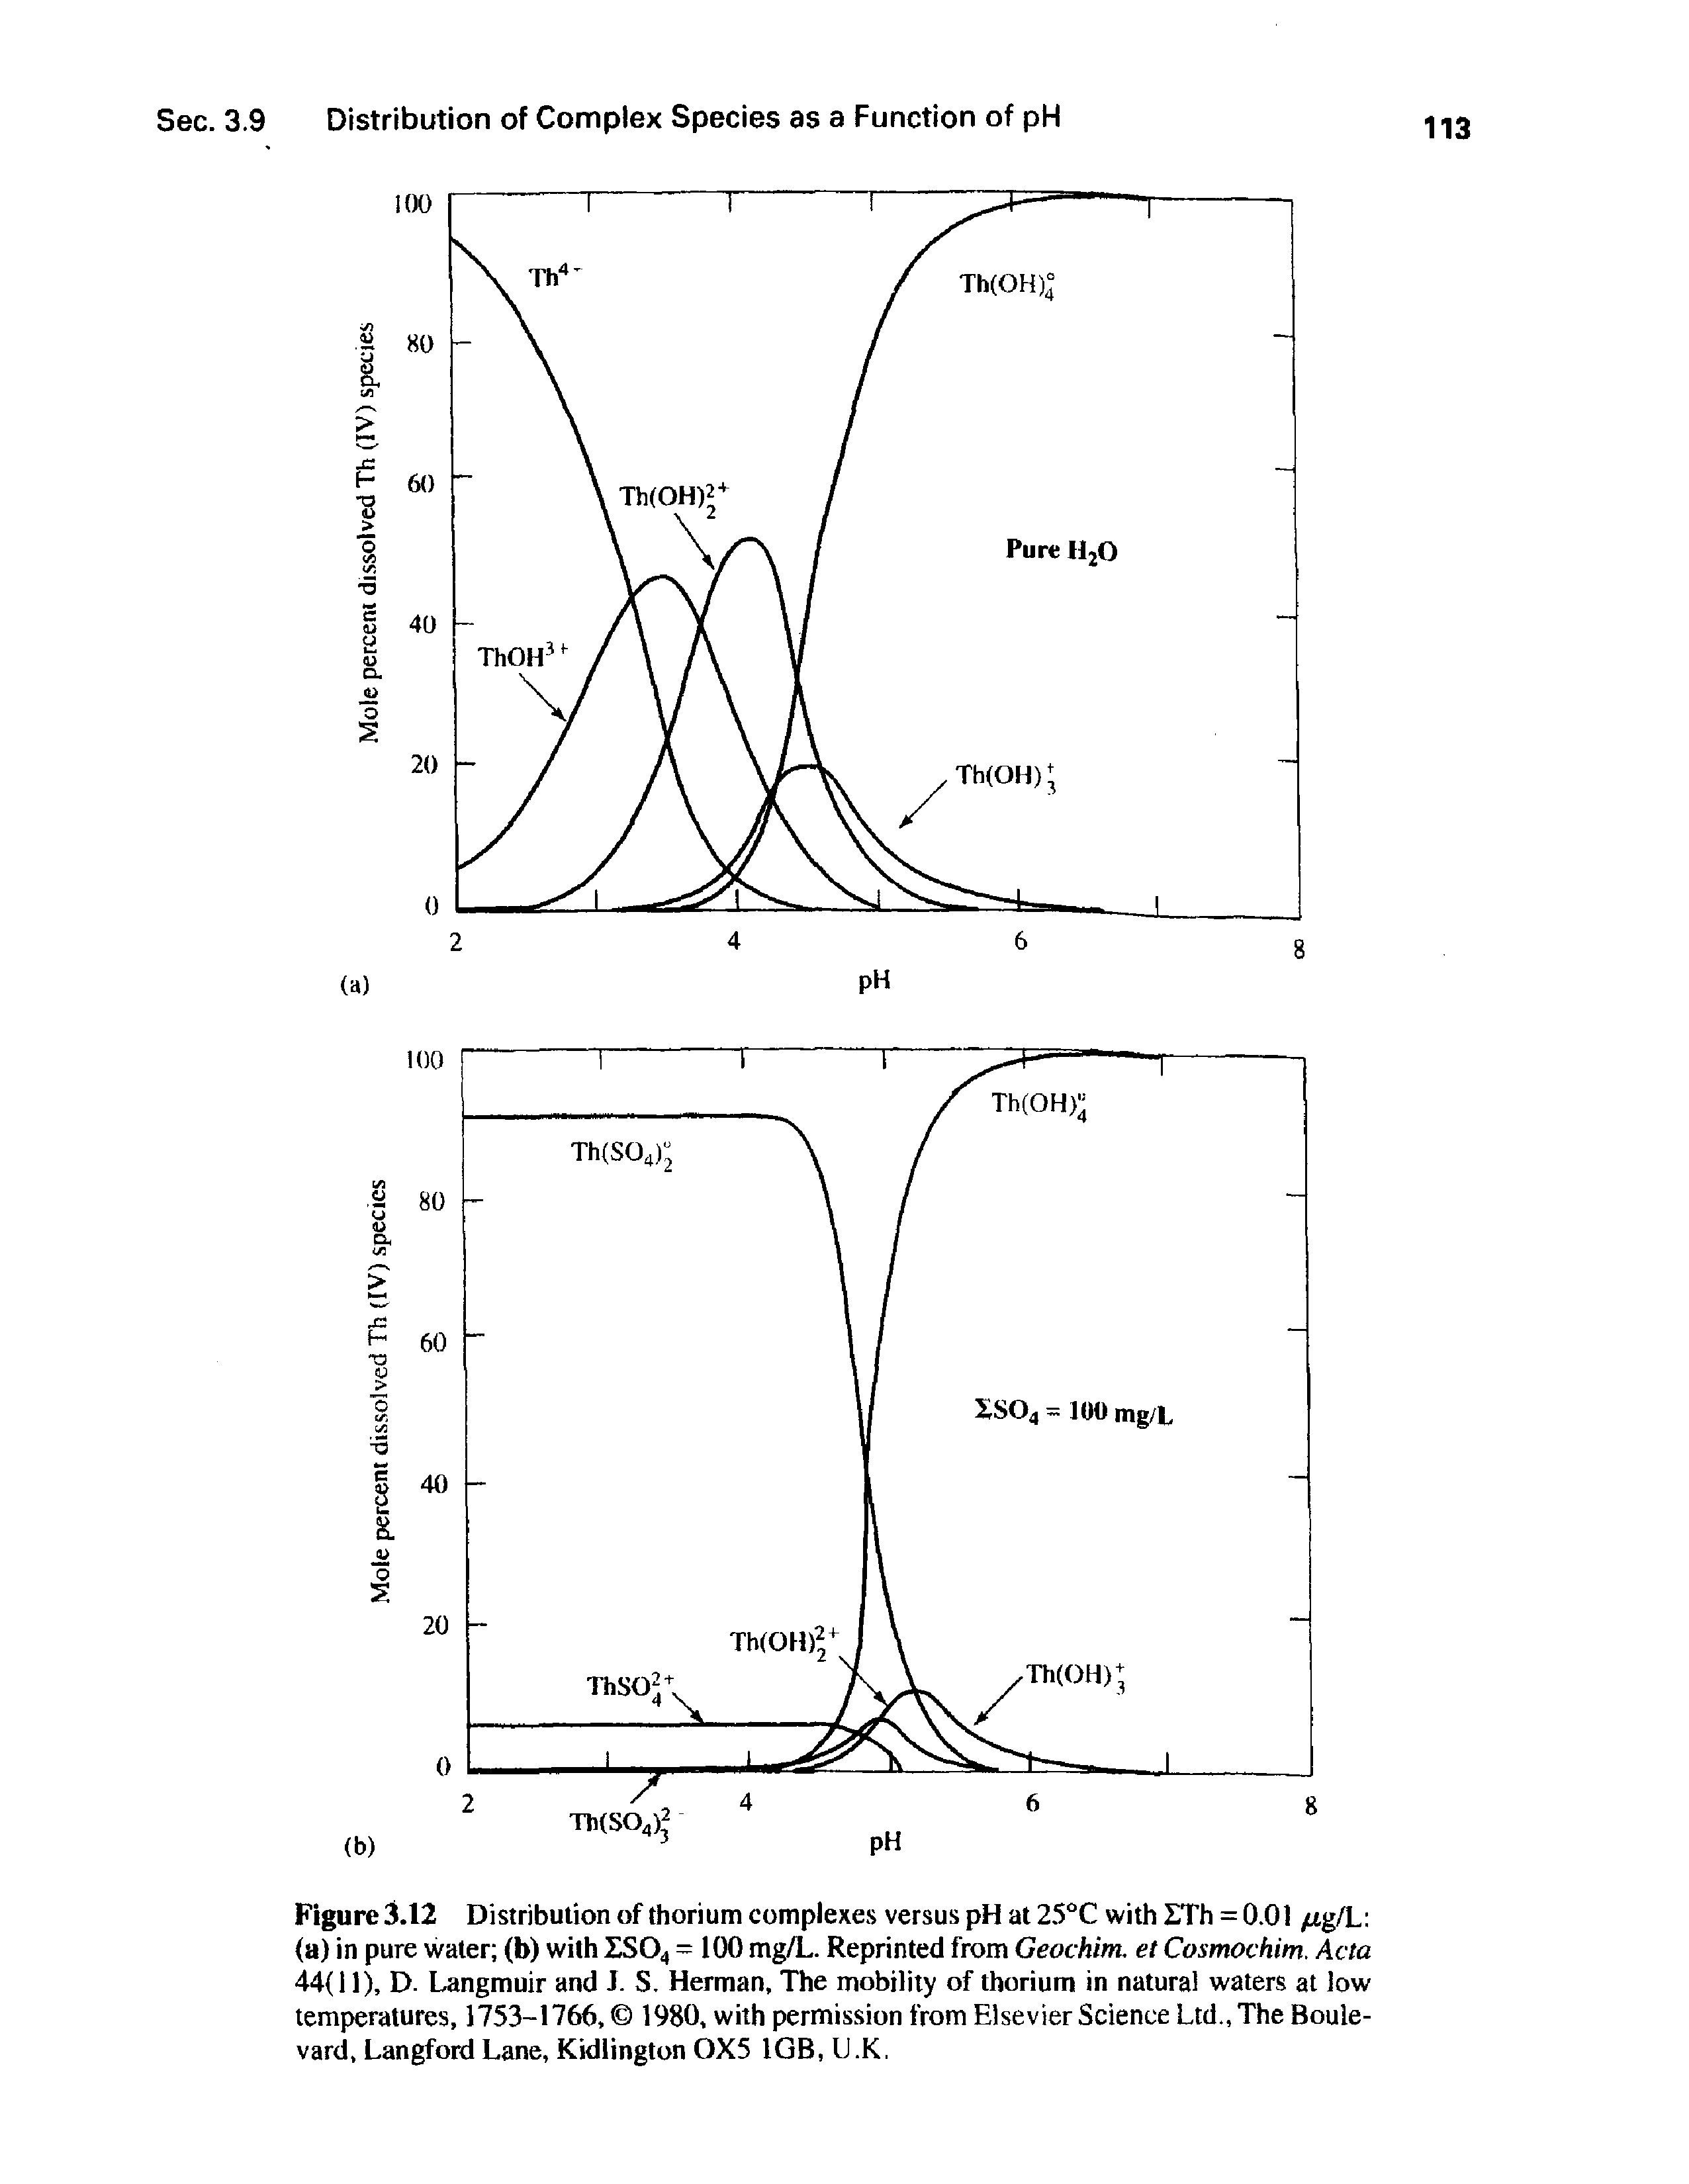 Figure 3.12 Distribution of thorium complexes versus pH at 2.5°C with LTh = 0.01 /ig/L (a) in pure water (b) with ZSO4 = 100 mg/L. Reprinted from Geochim. et Cosmochim. Acta 44(11), D. Langmuir and J. S. Herman, The mobility of thorium in natural waters at low temperatures, 1753-1766, 1980, with permission from Elsevier Science Ltd., The Boulevard, Langford Lane, Kidlington 0X5 1GB, L.K.